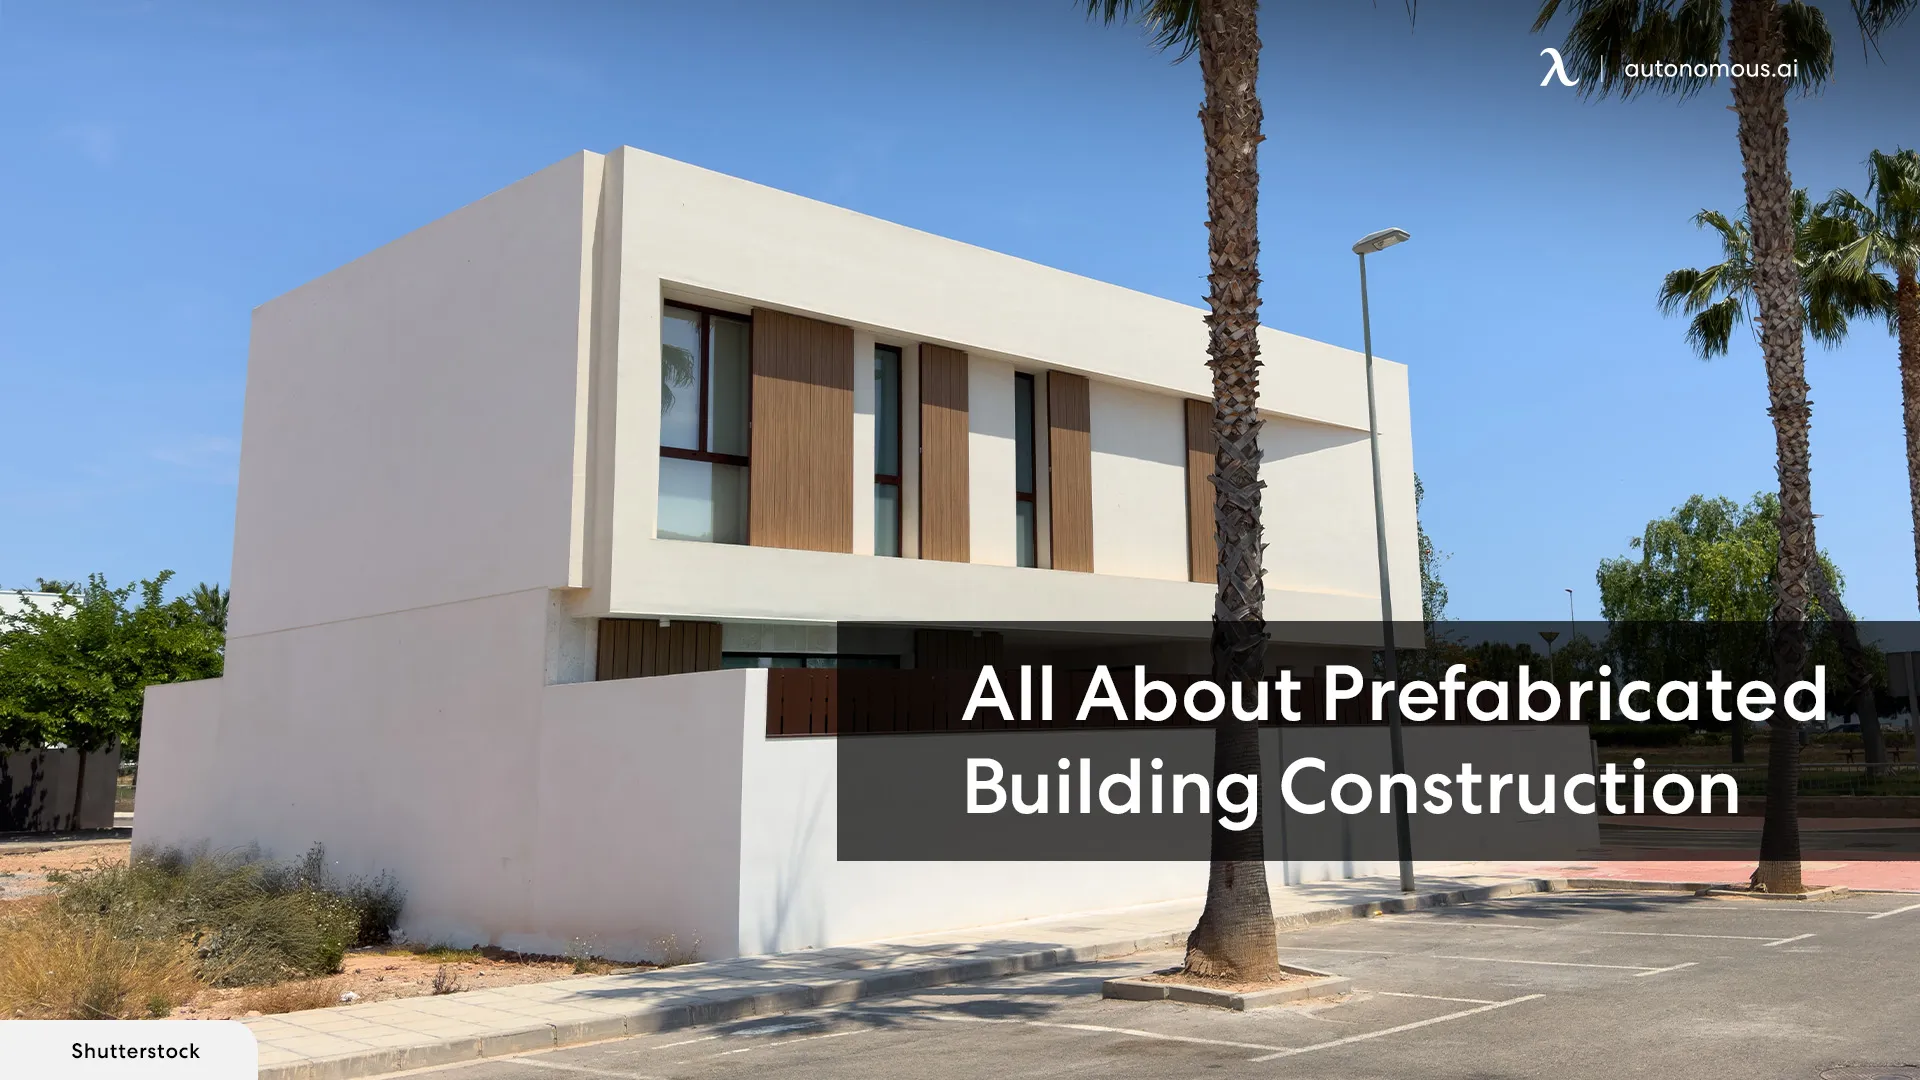 Prefabricated Building Construction: What Is It, and How Is It Made?